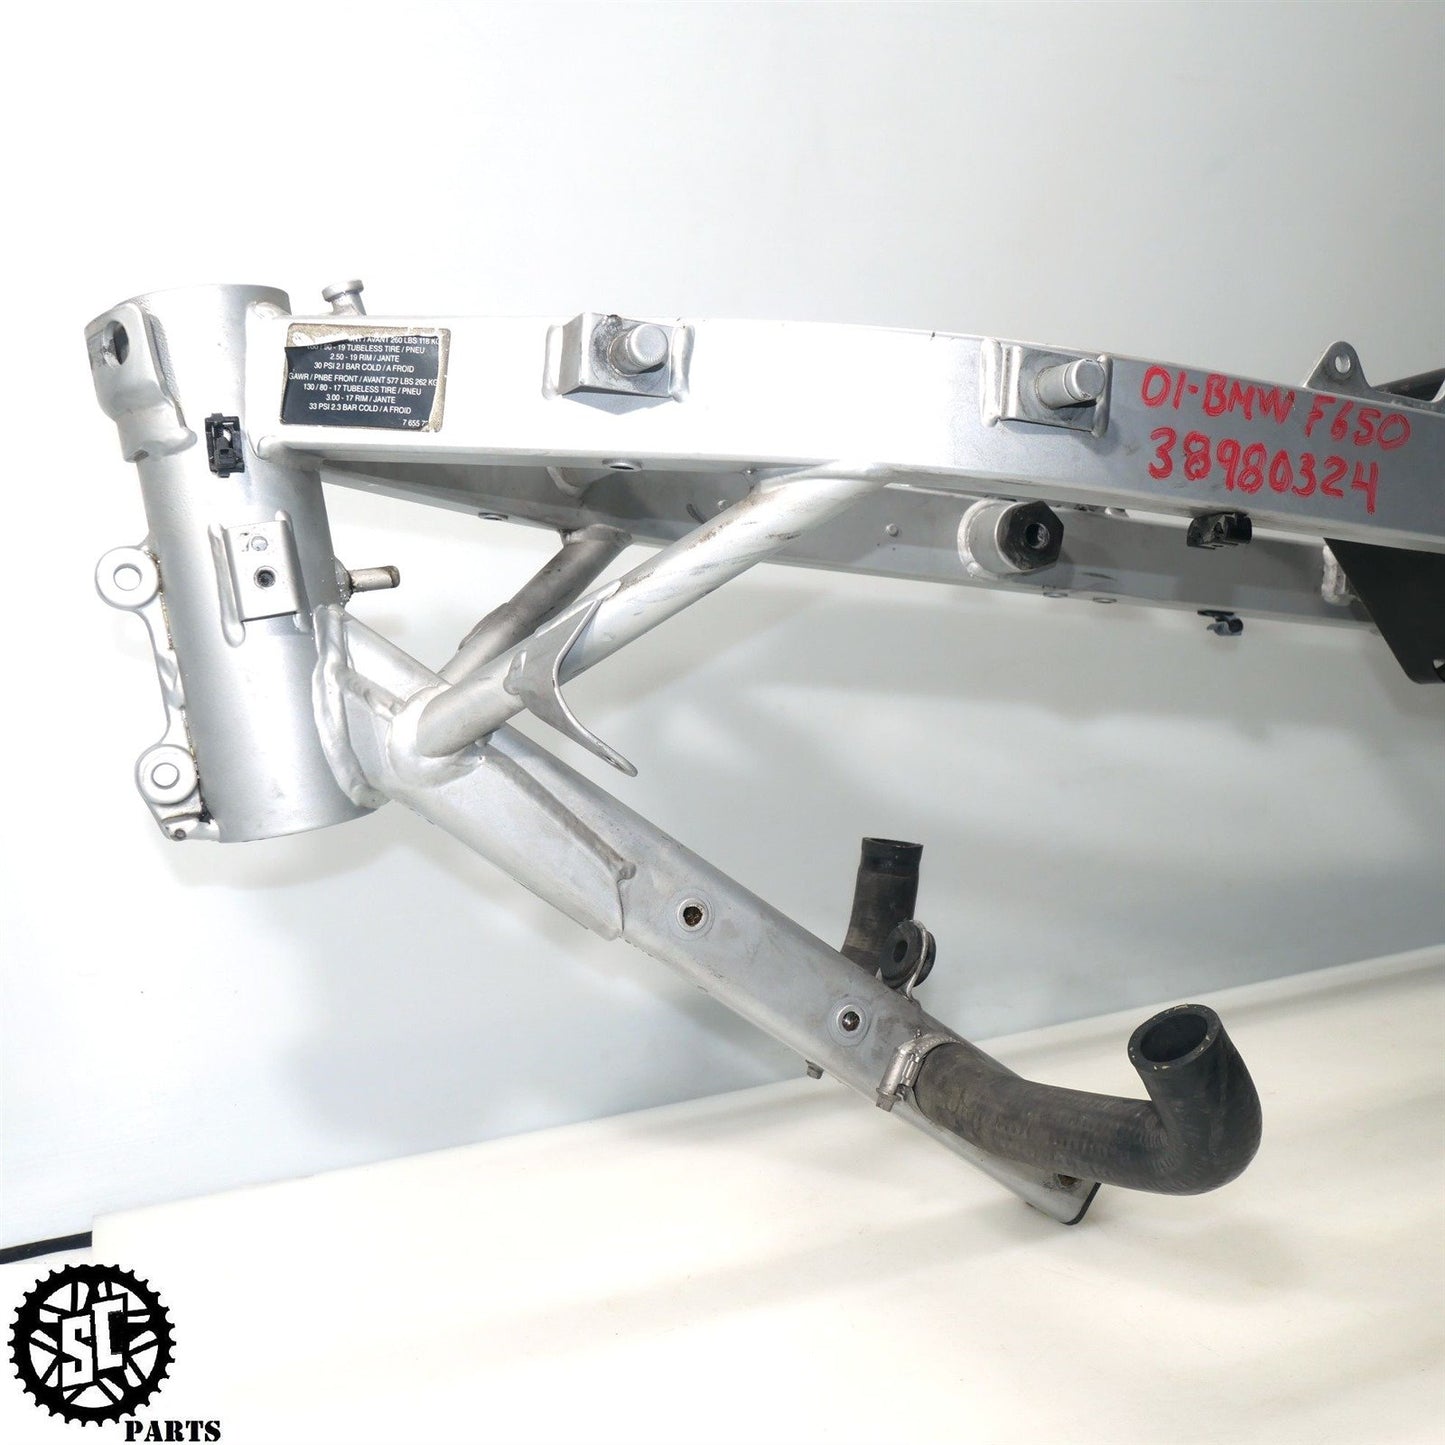 2001-2004 BMW F650GS FRAME CHASSIS *C* B17